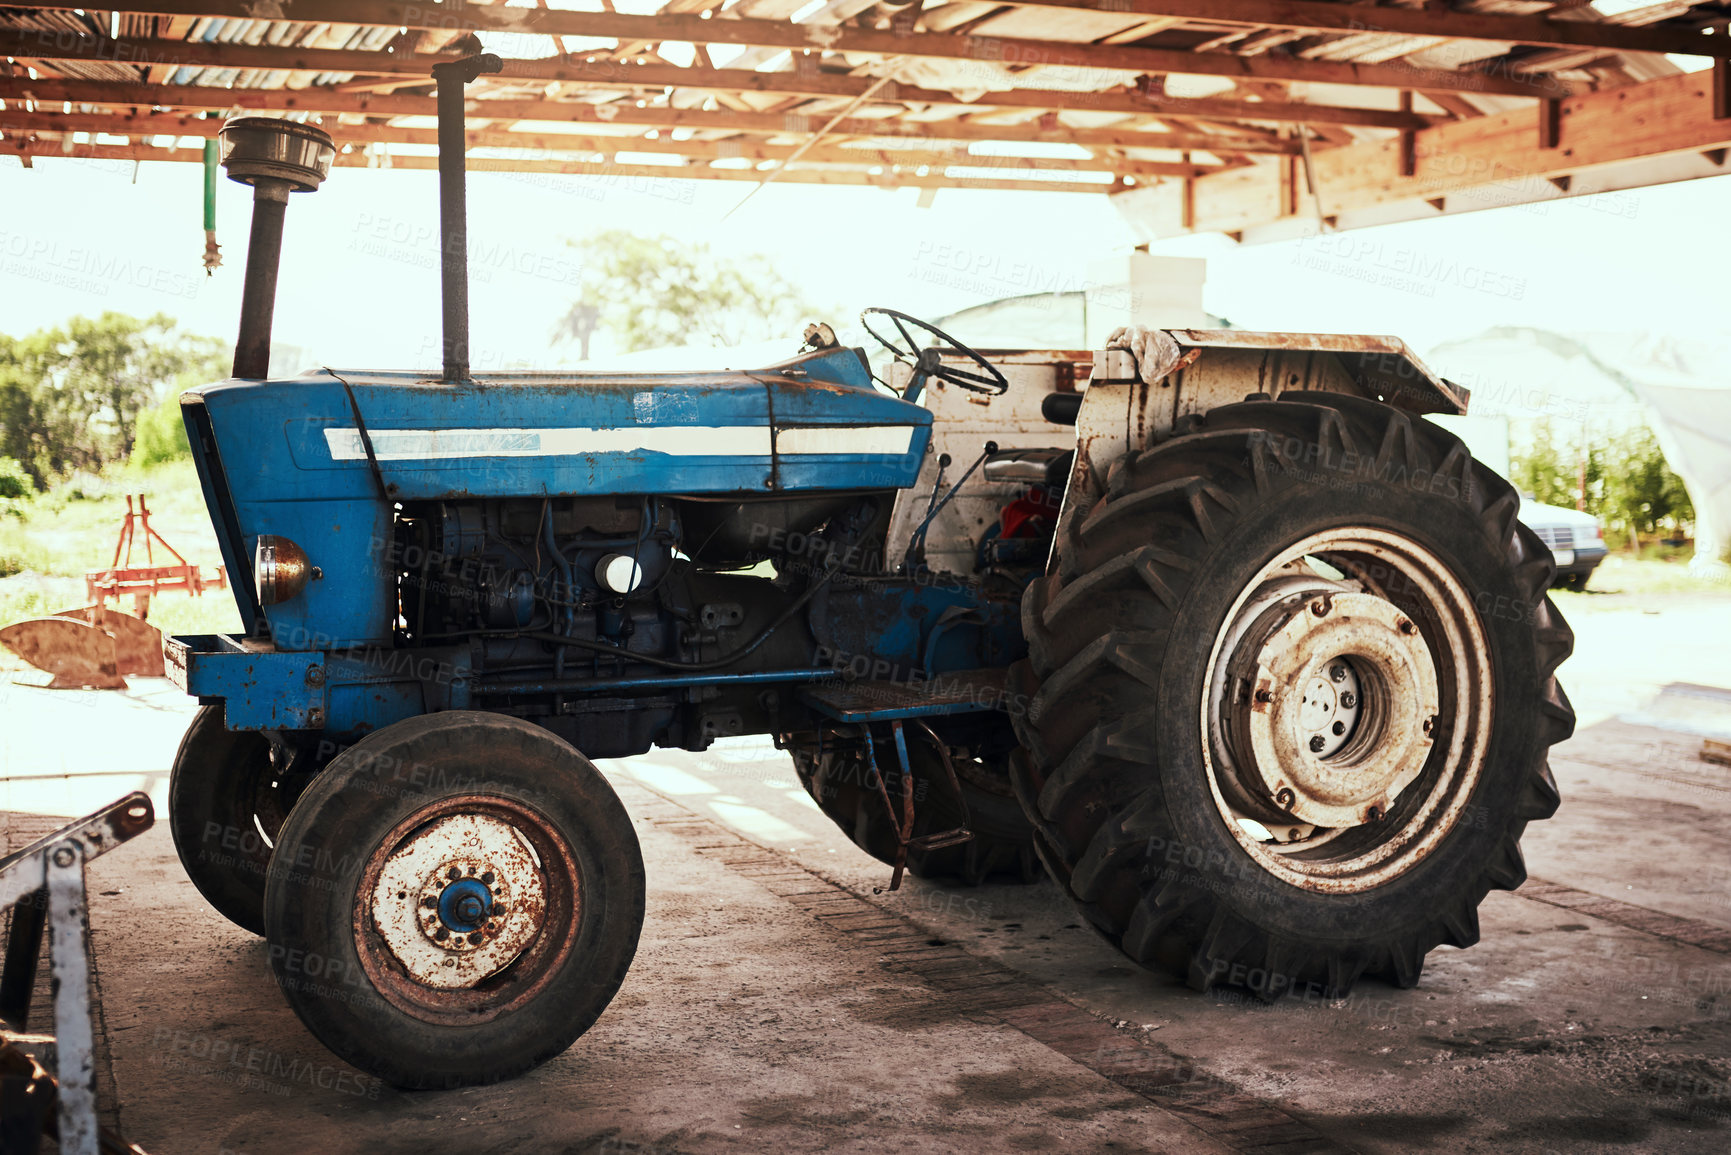 Buy stock photo Still life shot of a tractor parked at a farm